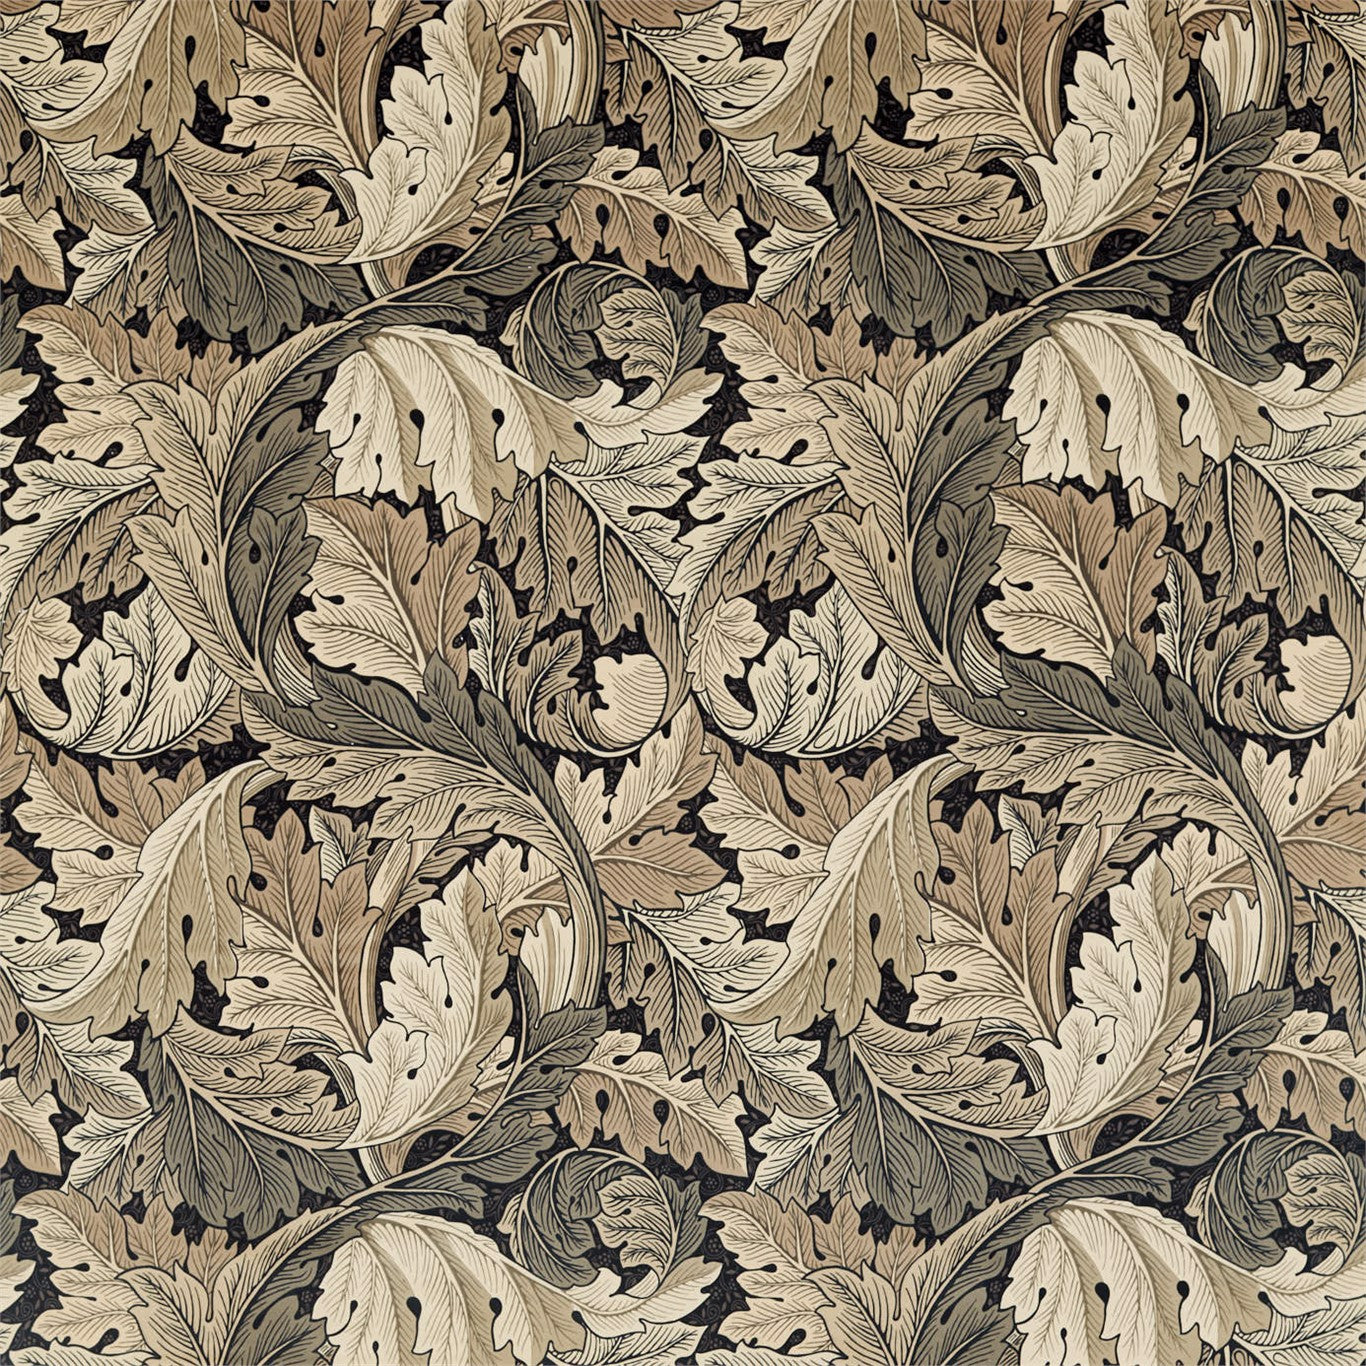 Acanthus Fabric by Morris & Co. - DMA4226399 - Charcoal/Grey